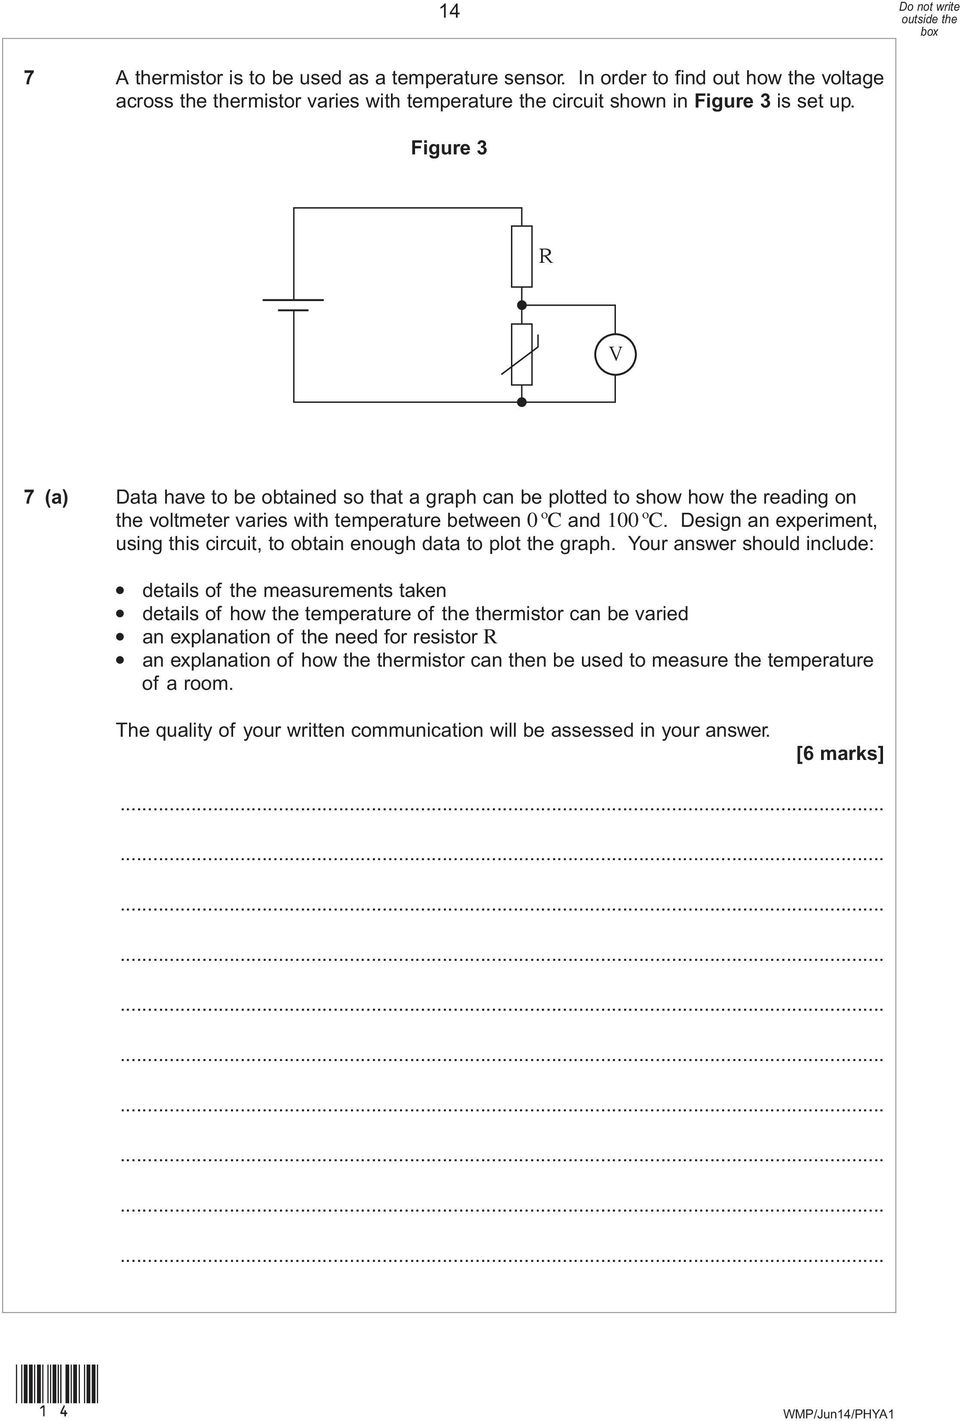 Design an experiment, using this circuit, to obtain enough data to plot the graph.